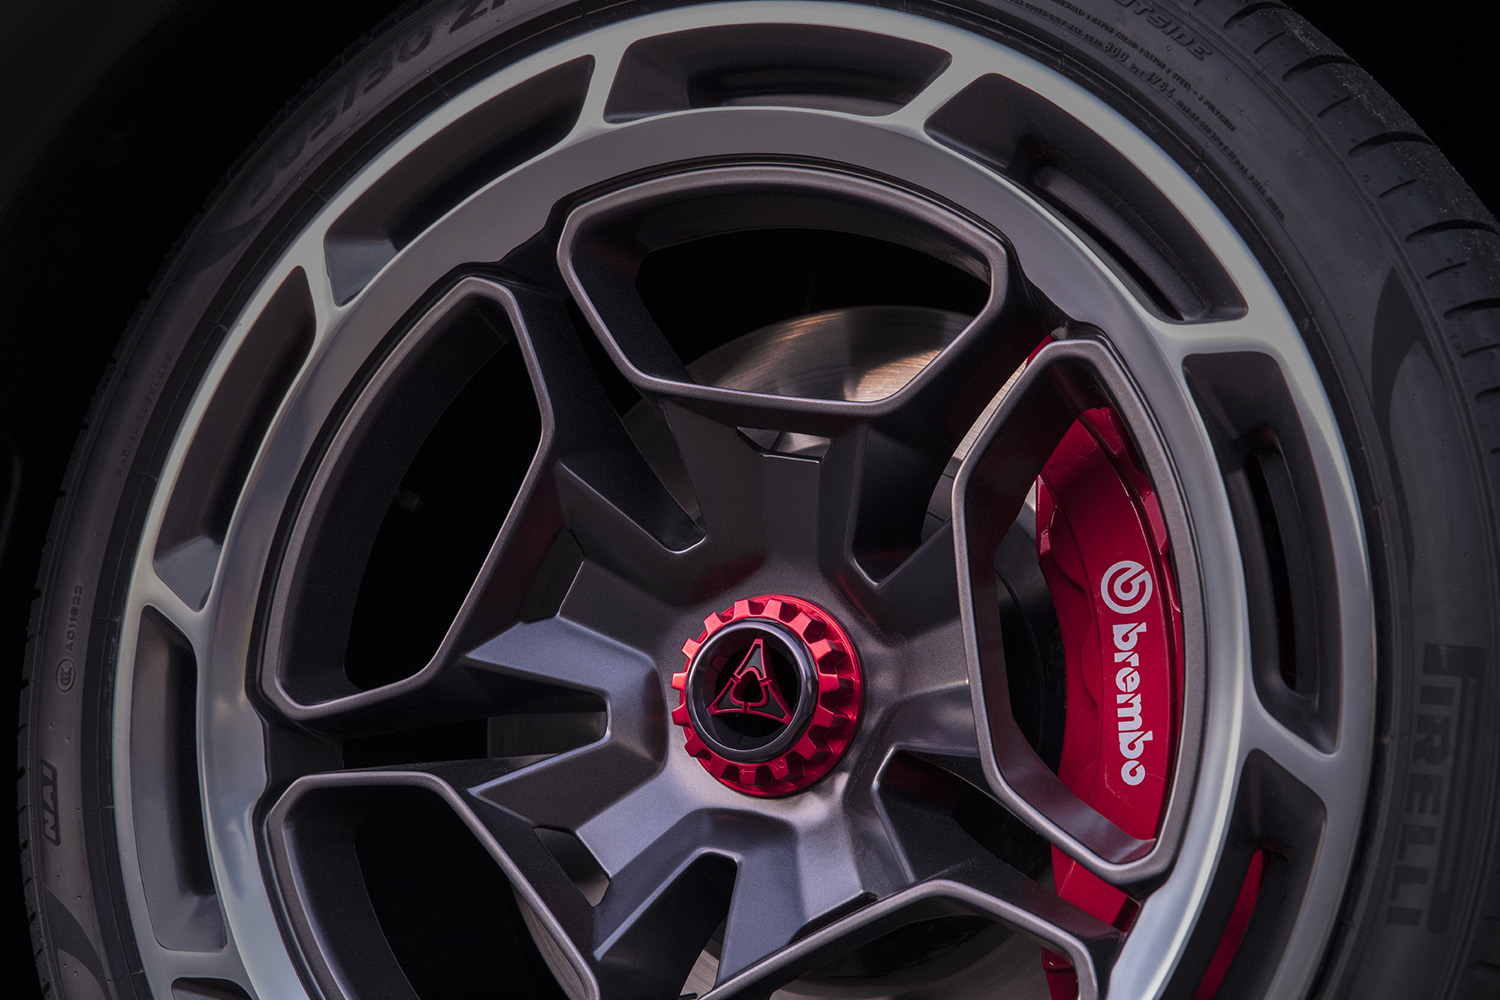 The Dodge Charger Daytona SRT Concept rolls on painted-pocket 21-inch wheels with diamond-cut faces that continue the concept’s aerodynamic efficiencies with a turbine-like design, and a red Fratzog logo embellishes the wheel center locks.